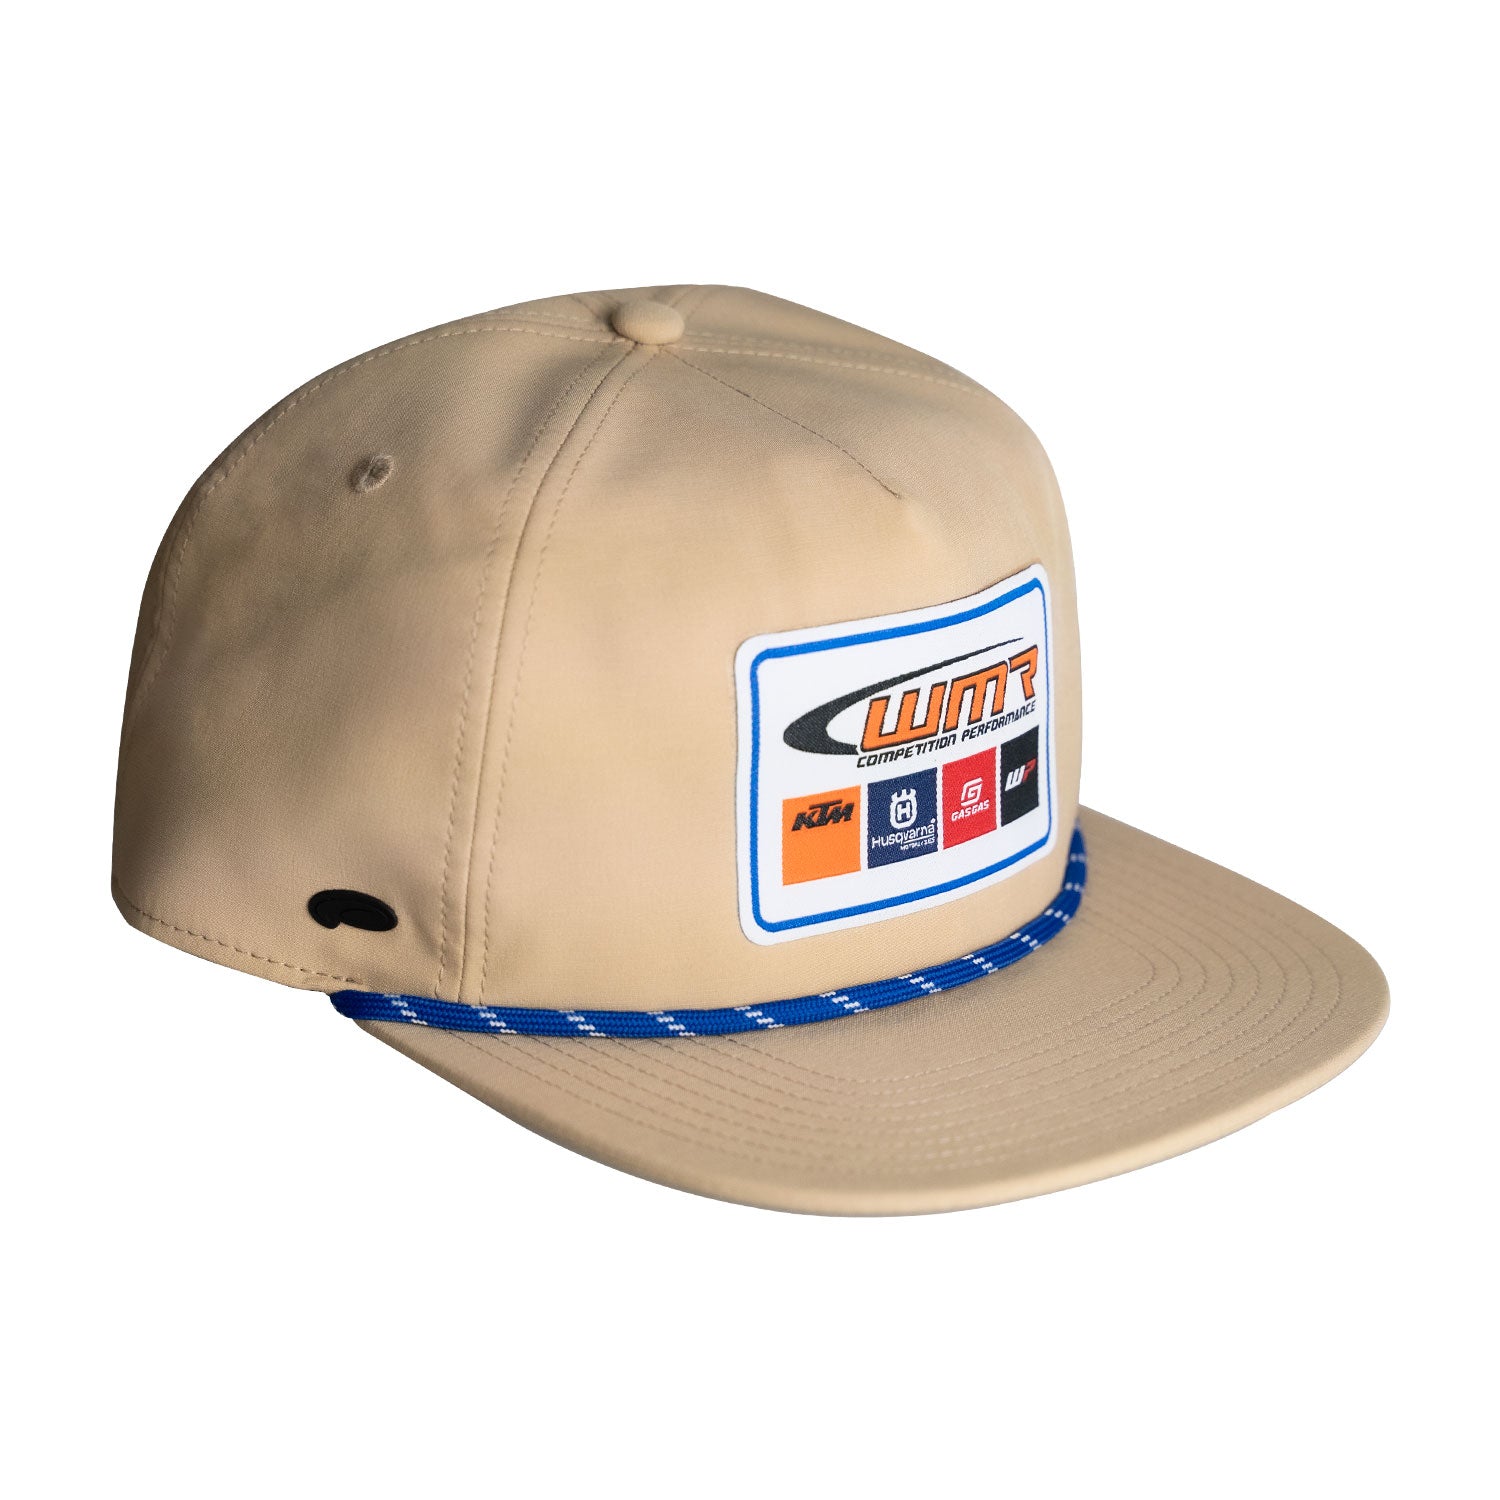 WMR Competition Performance Dry Fit Hat